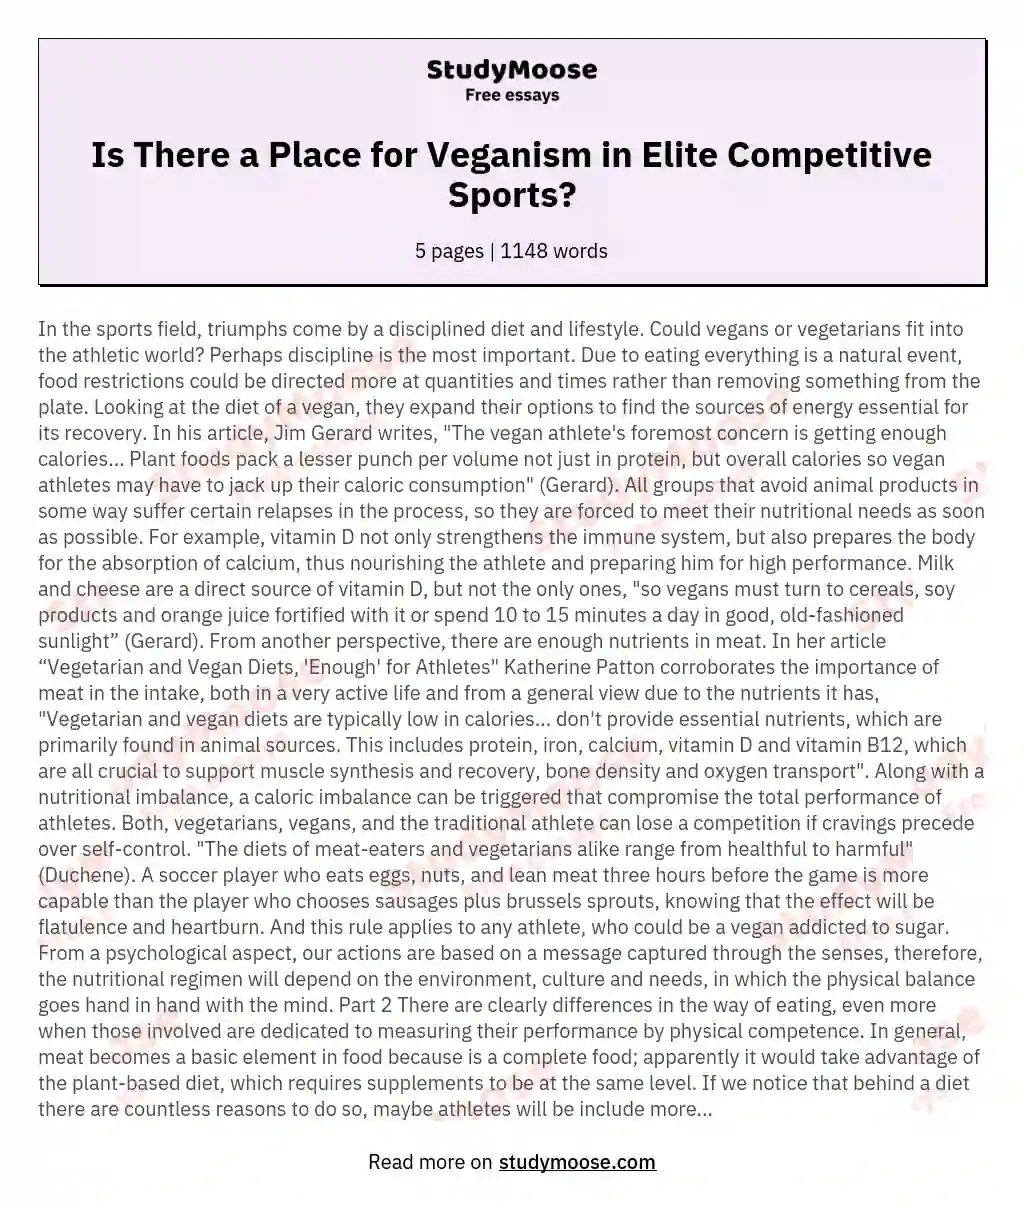 Is There a Place for Veganism in Elite Competitive Sports? essay